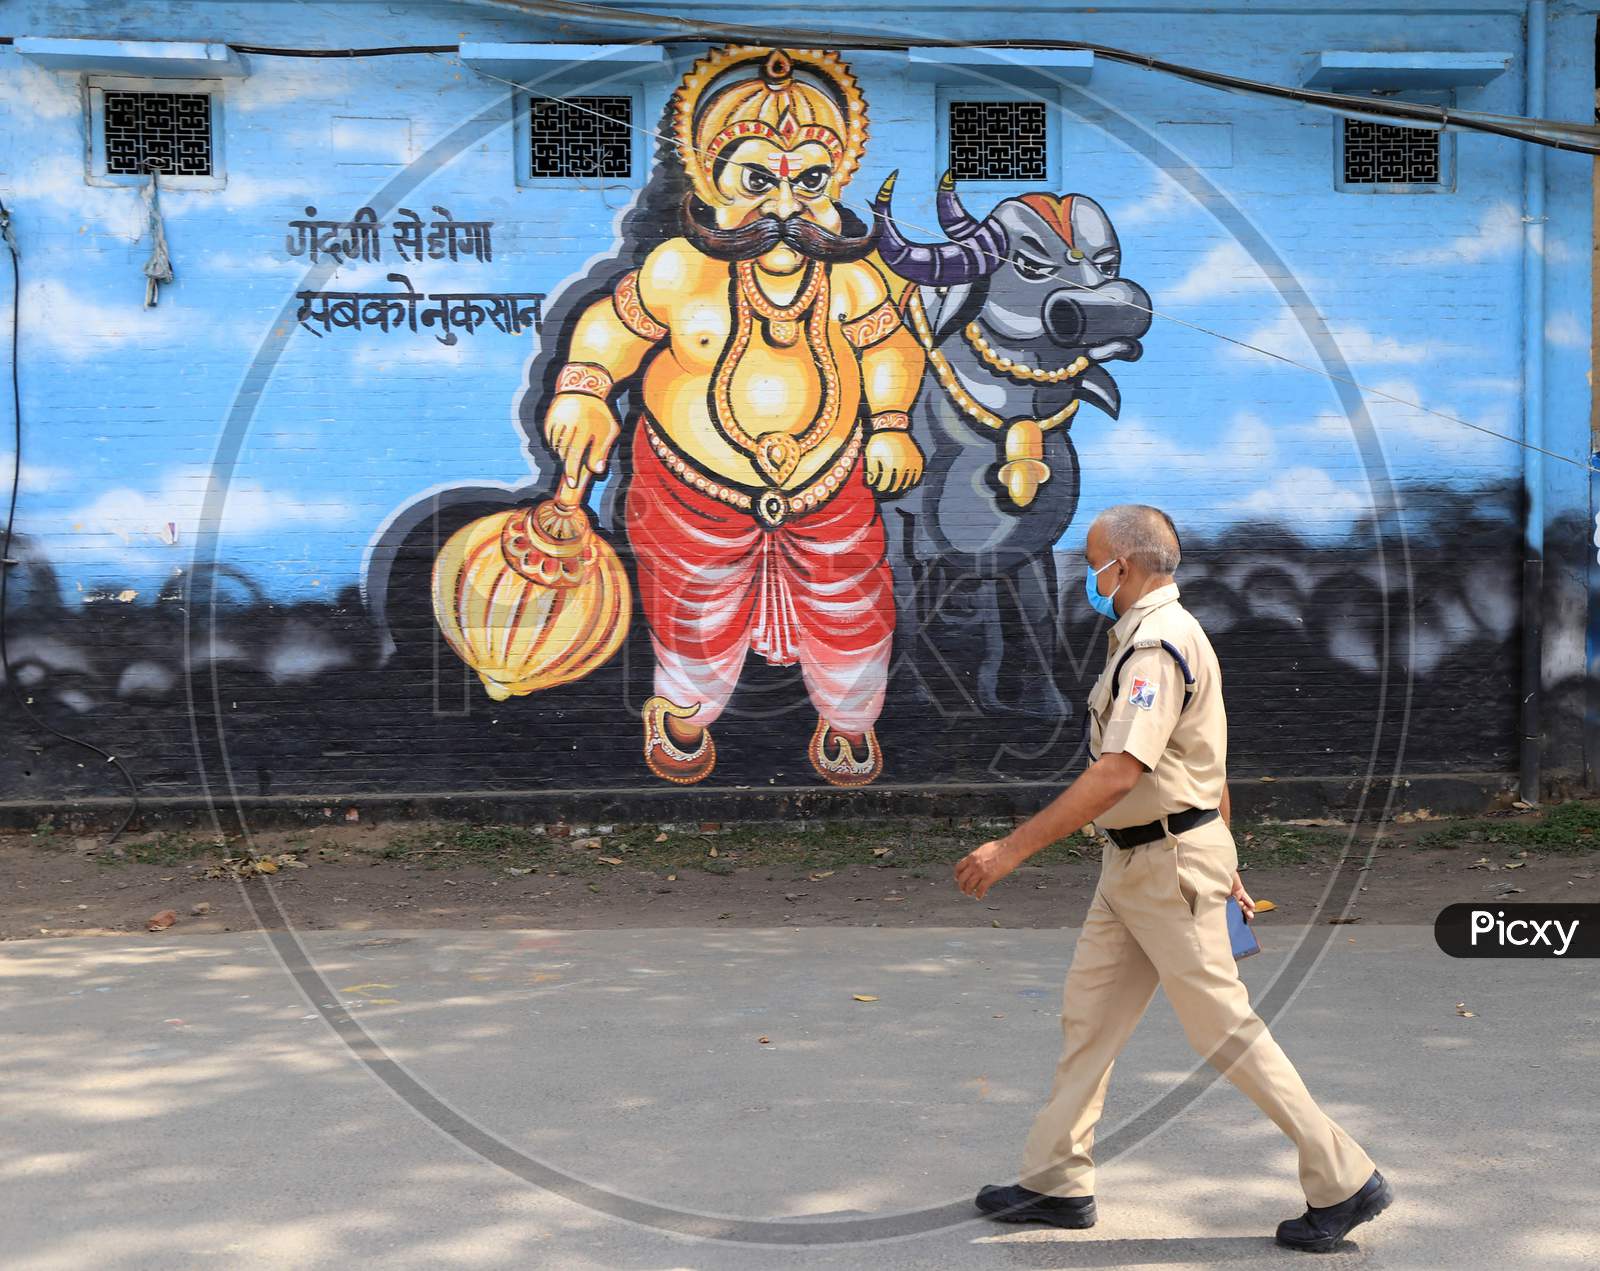 A Rpf Jawan Walk In Front Of Wall Painting Of Yamraj During A Nationwide Lockdown To Slow The Spreading Of The Coronavirus Disease (Covid-19), In Prayagraj, April, 17, 2020.